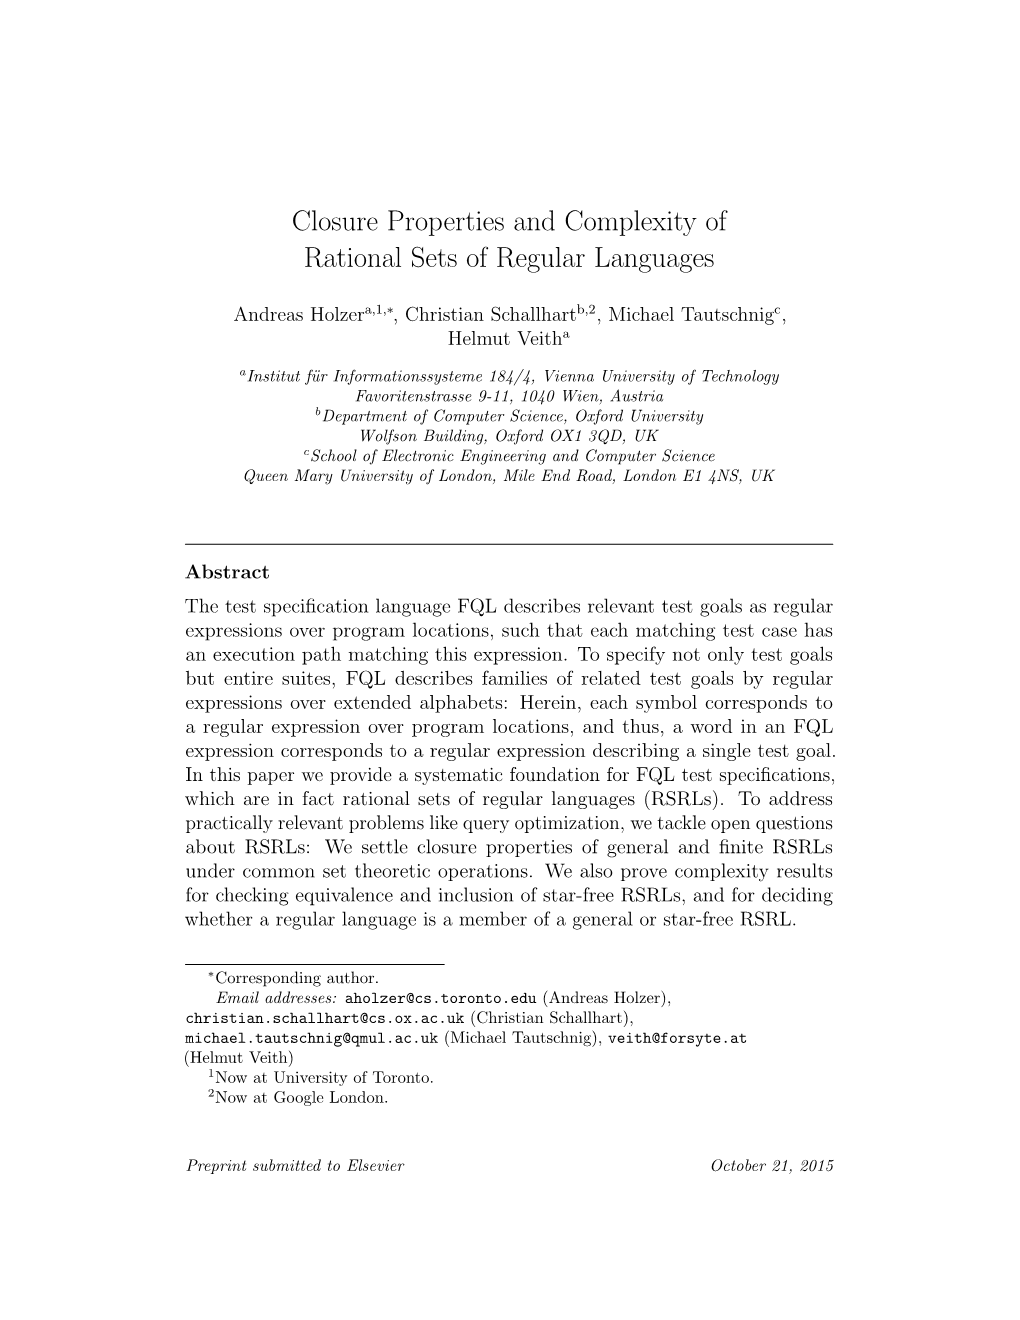 Closure Properties and Complexity of Rational Sets of Regular Languages